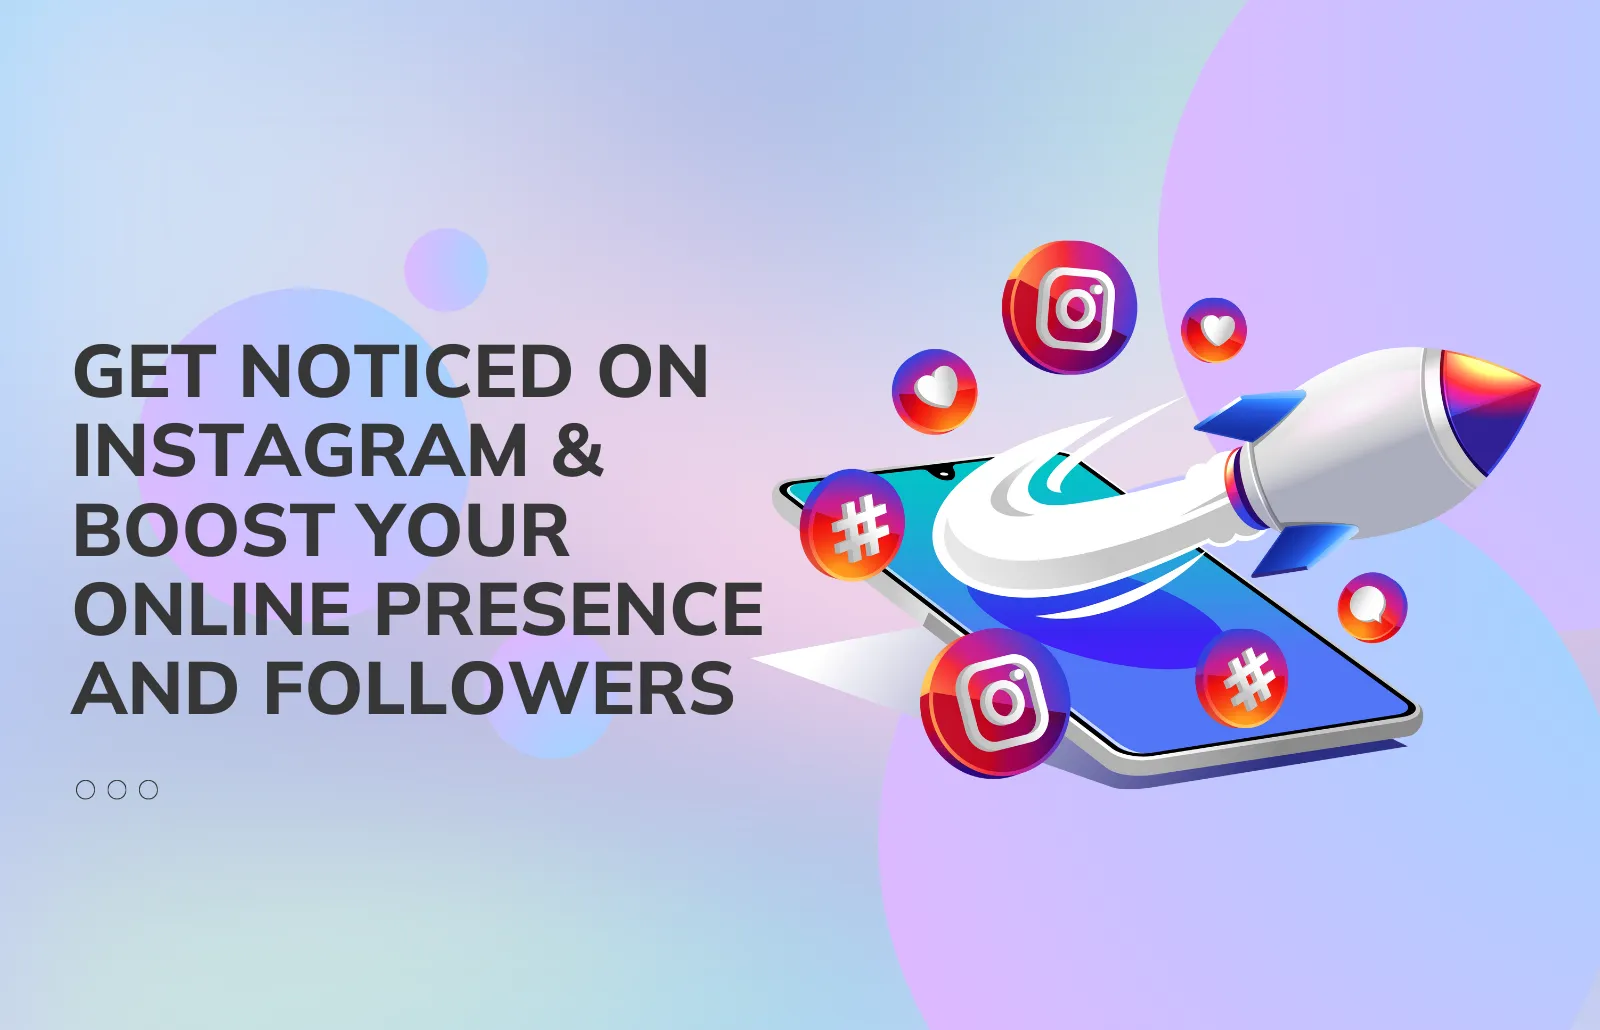 Get-Noticed-on-Instagram-Boost-Your-Online-Presence-and-Followers